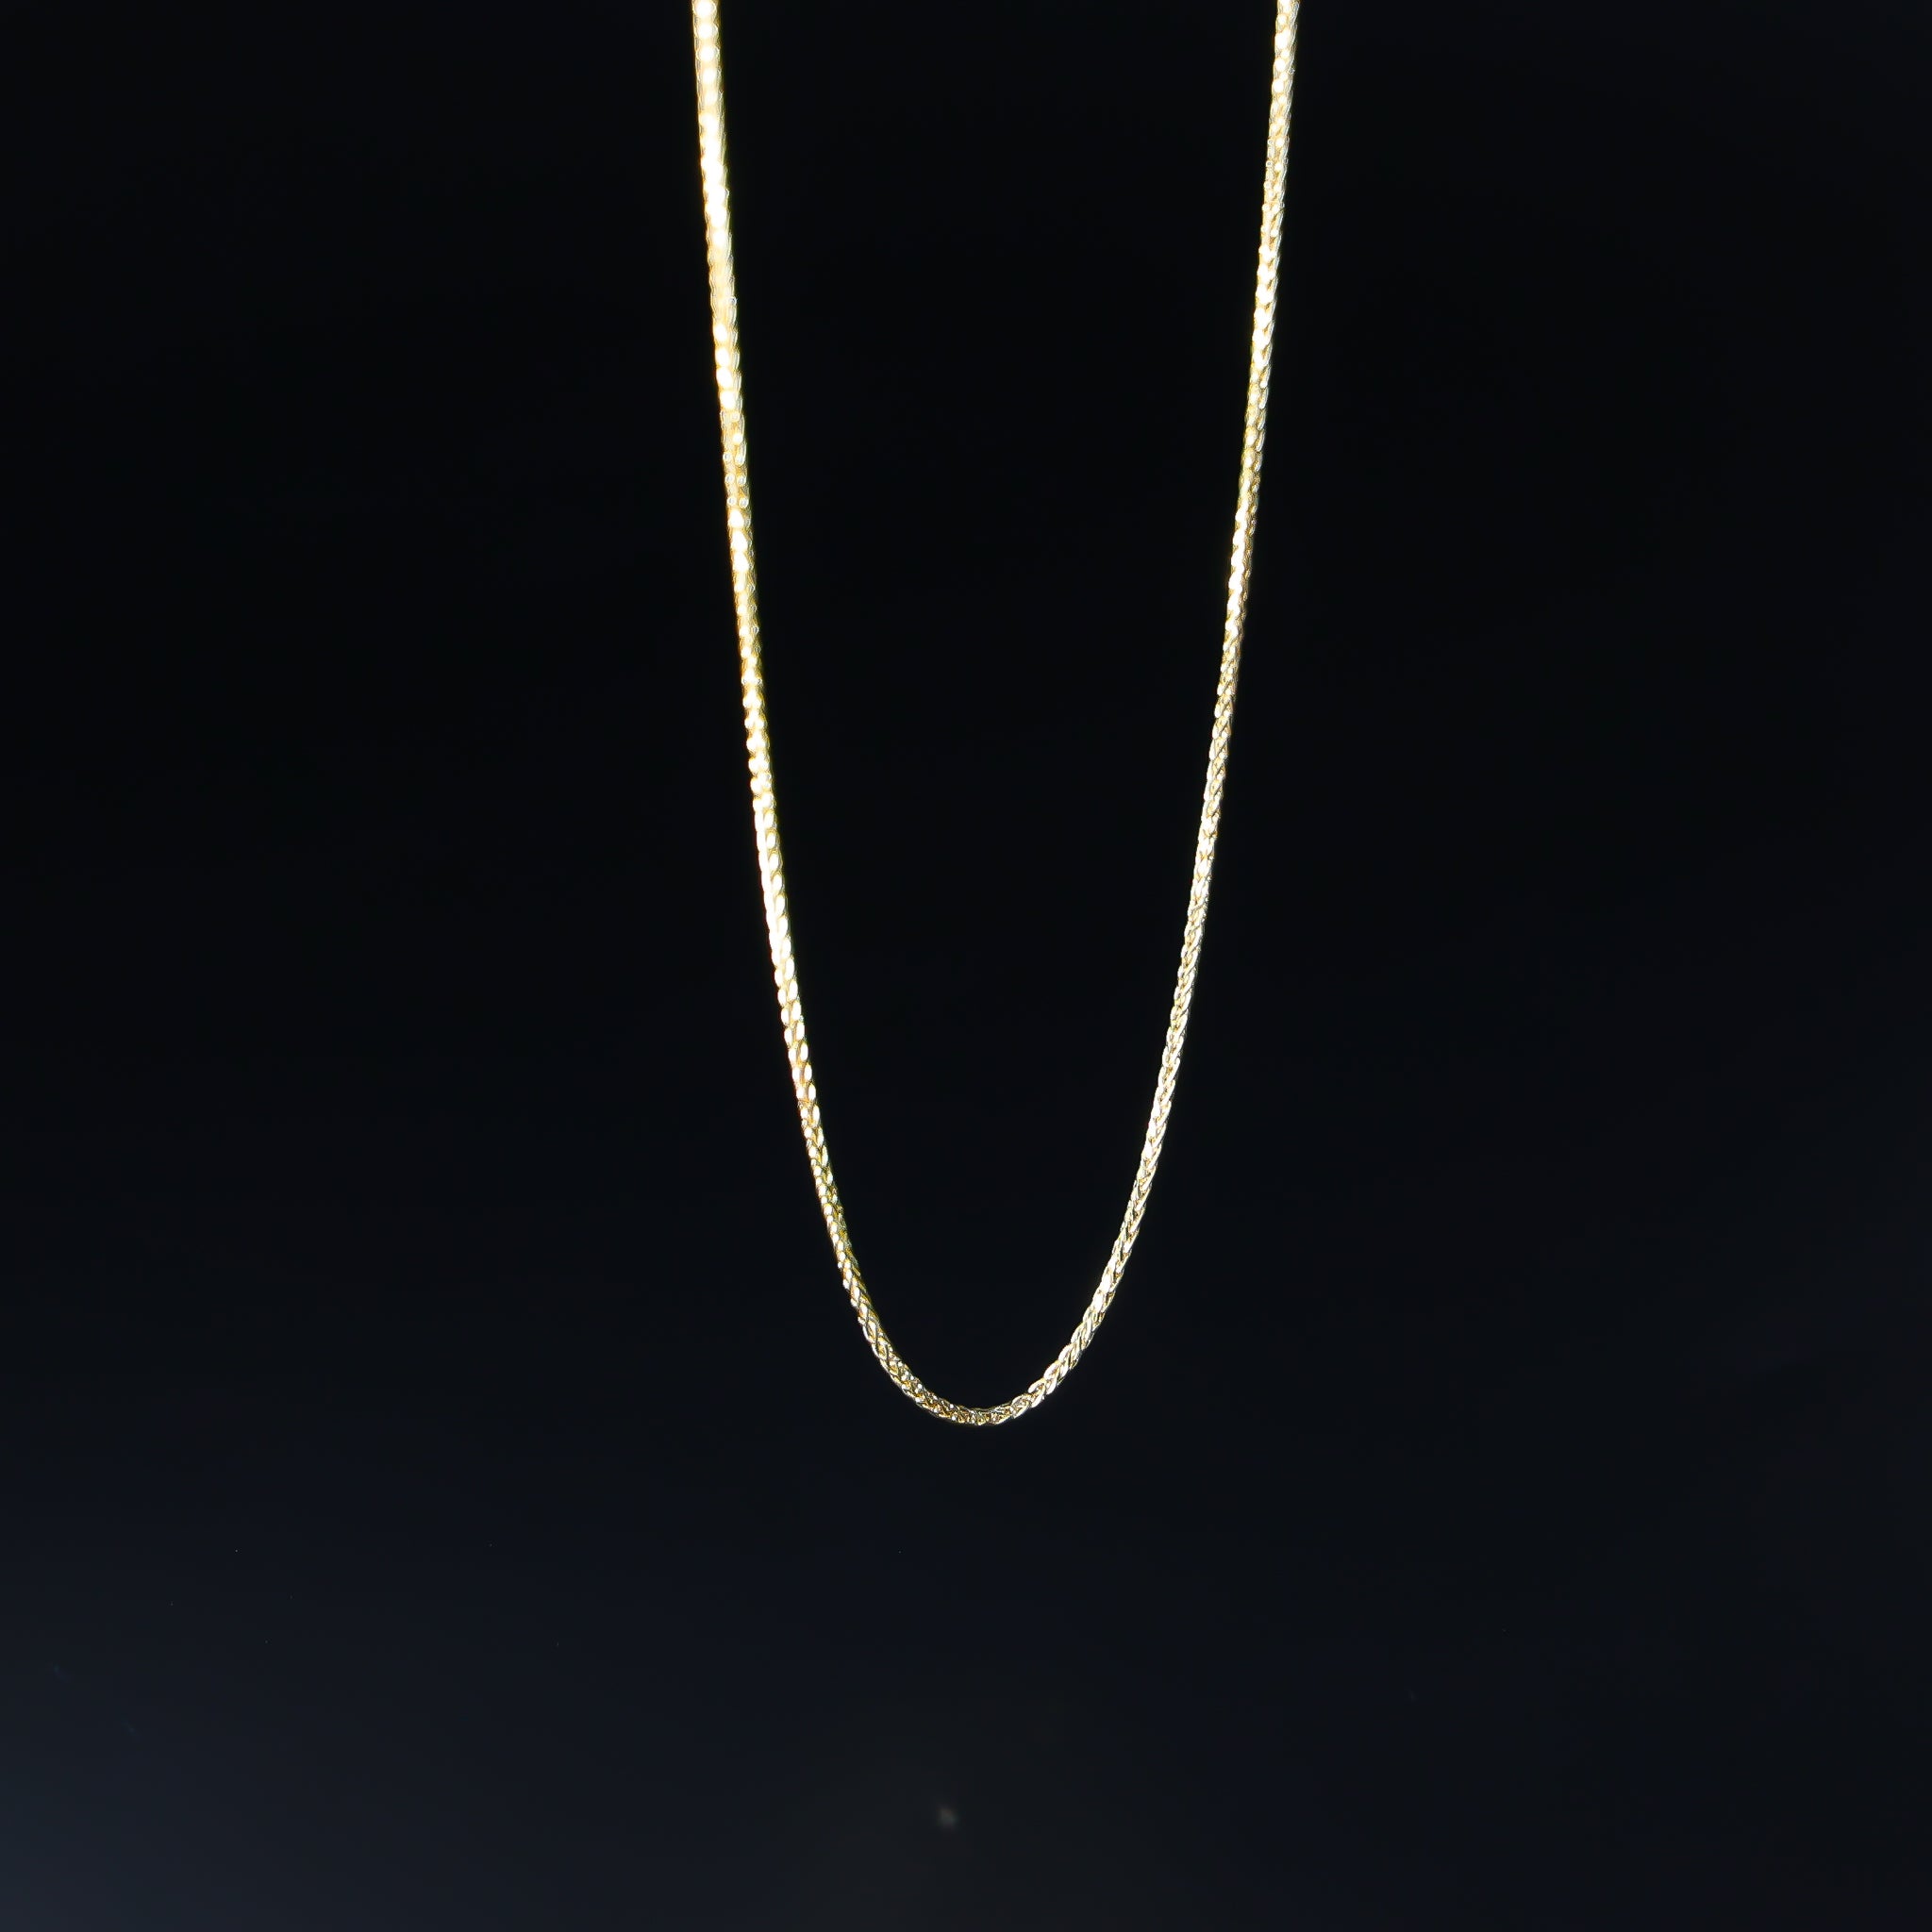 1mm 14k Solid Gold Wheat Link Chain Model-0545 - Charlie & Co. Jewelry